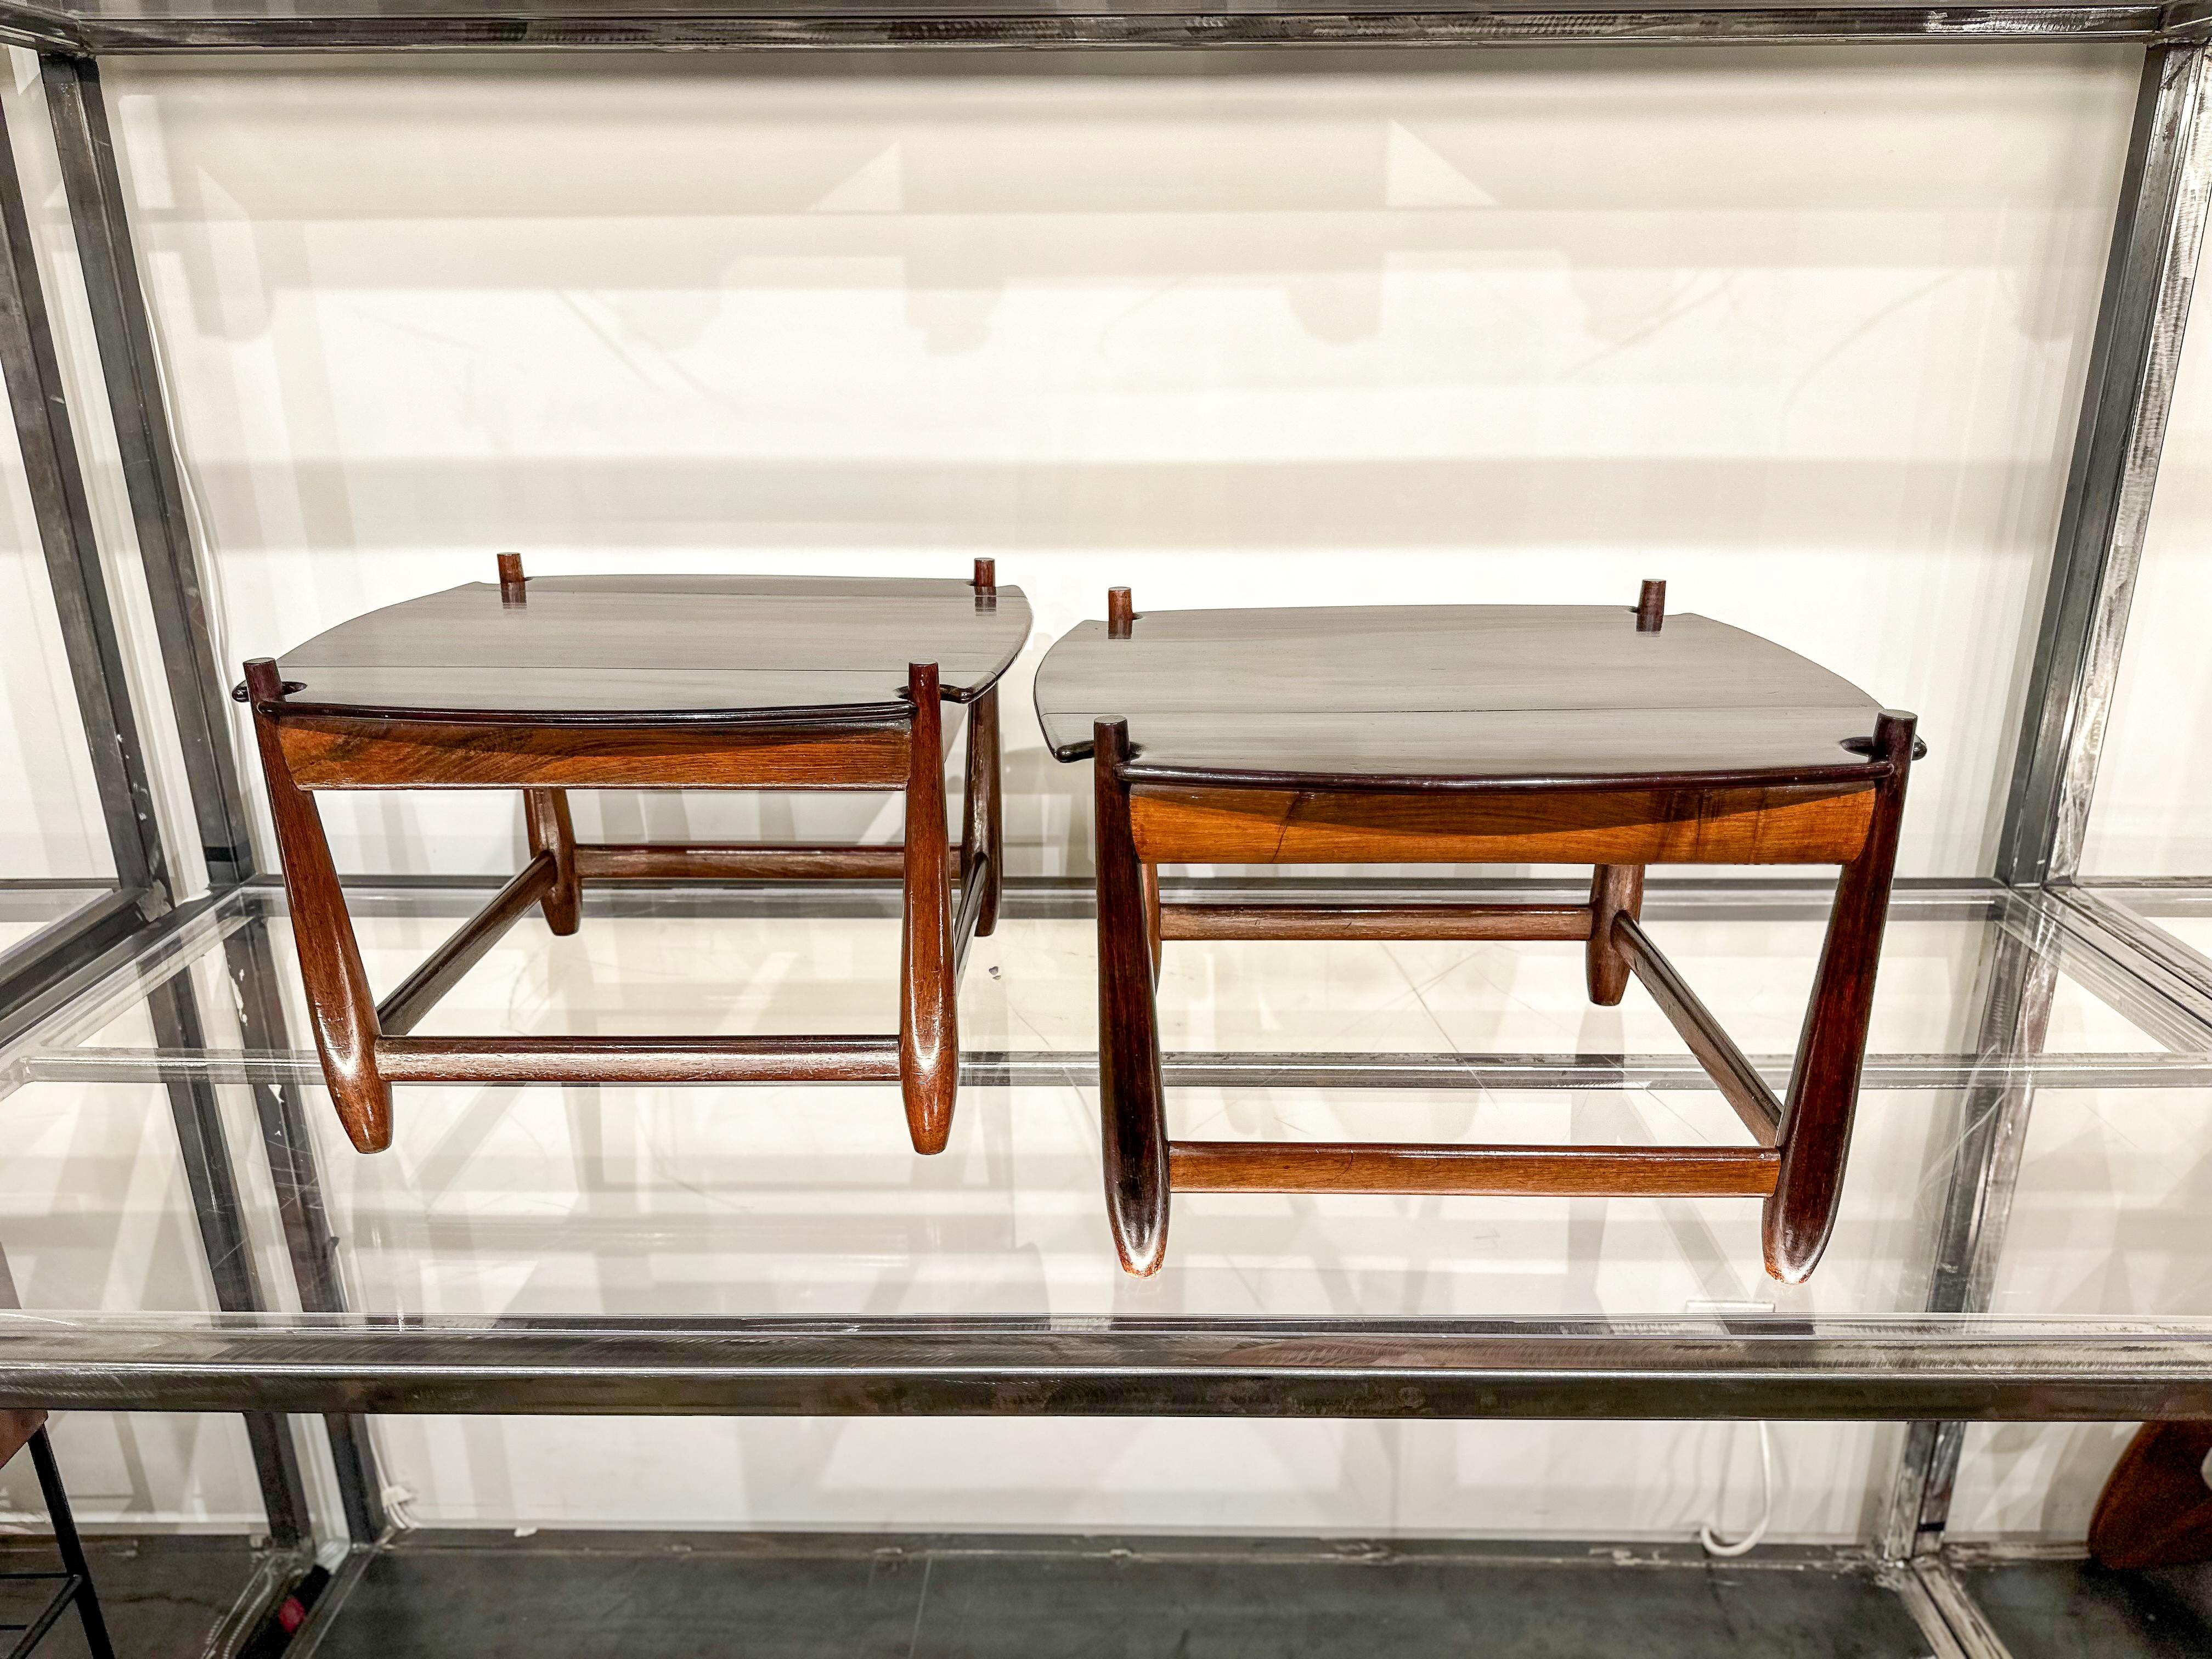 20th Century Brazilian Modern “Arimelo” Side Tables in Hardwood, Sergio Rodrigues, 1958   For Sale